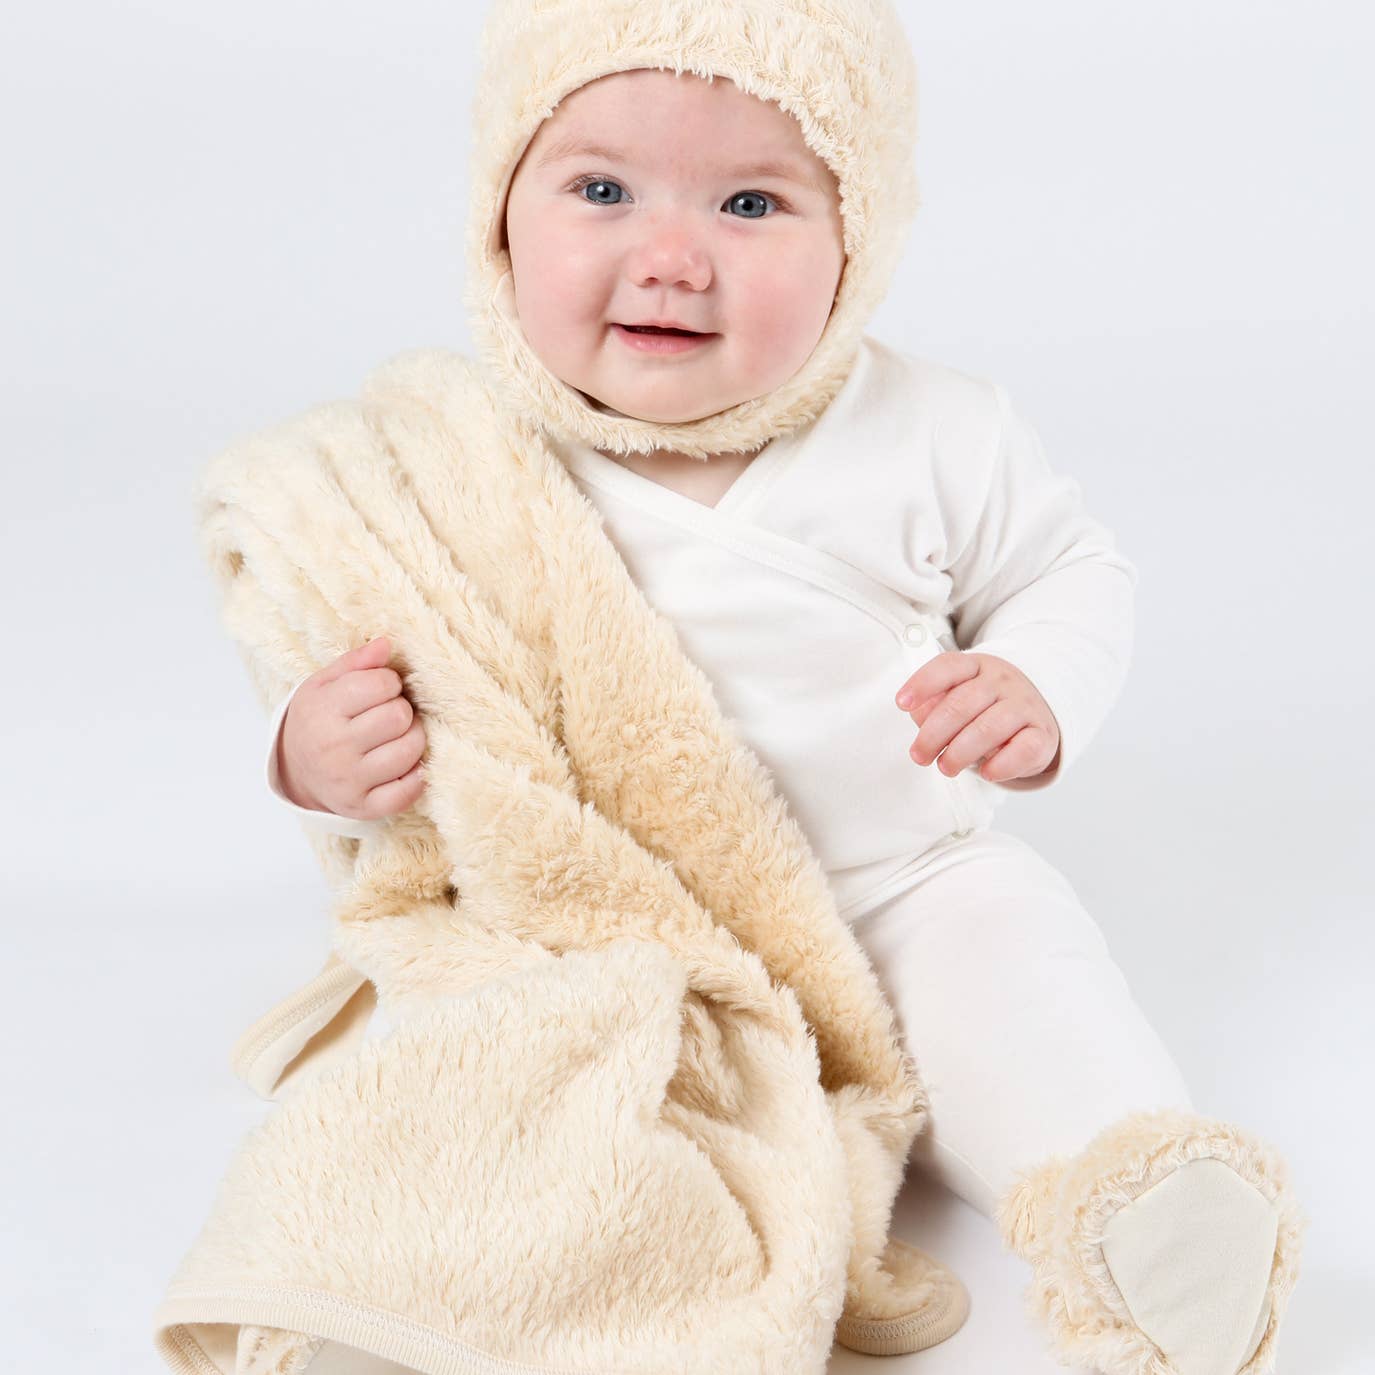 baby with sherpa hat and blanket